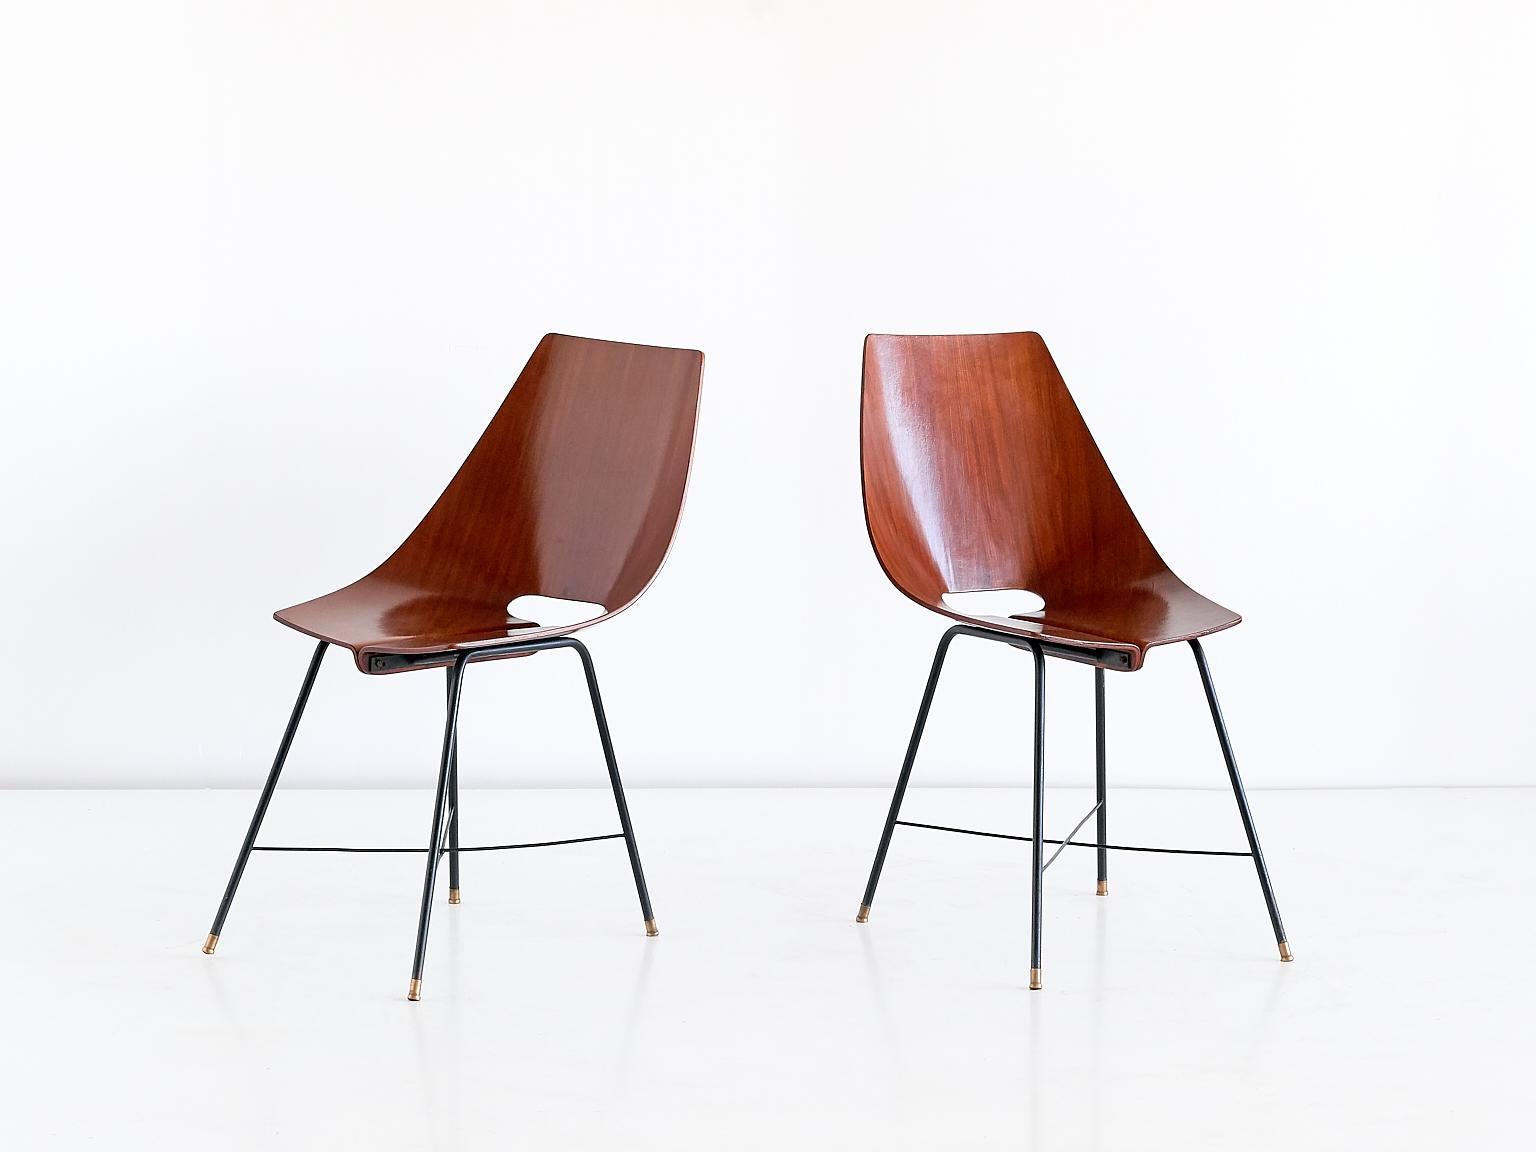 This rare set of six dining chairs was manufactured by Societá Compensati Curvati in Monza, Italy in 1959. The chairs feature a teak plywood shell seat mounted on a black metal crossed base. This striking design was numbered model 127-B by the